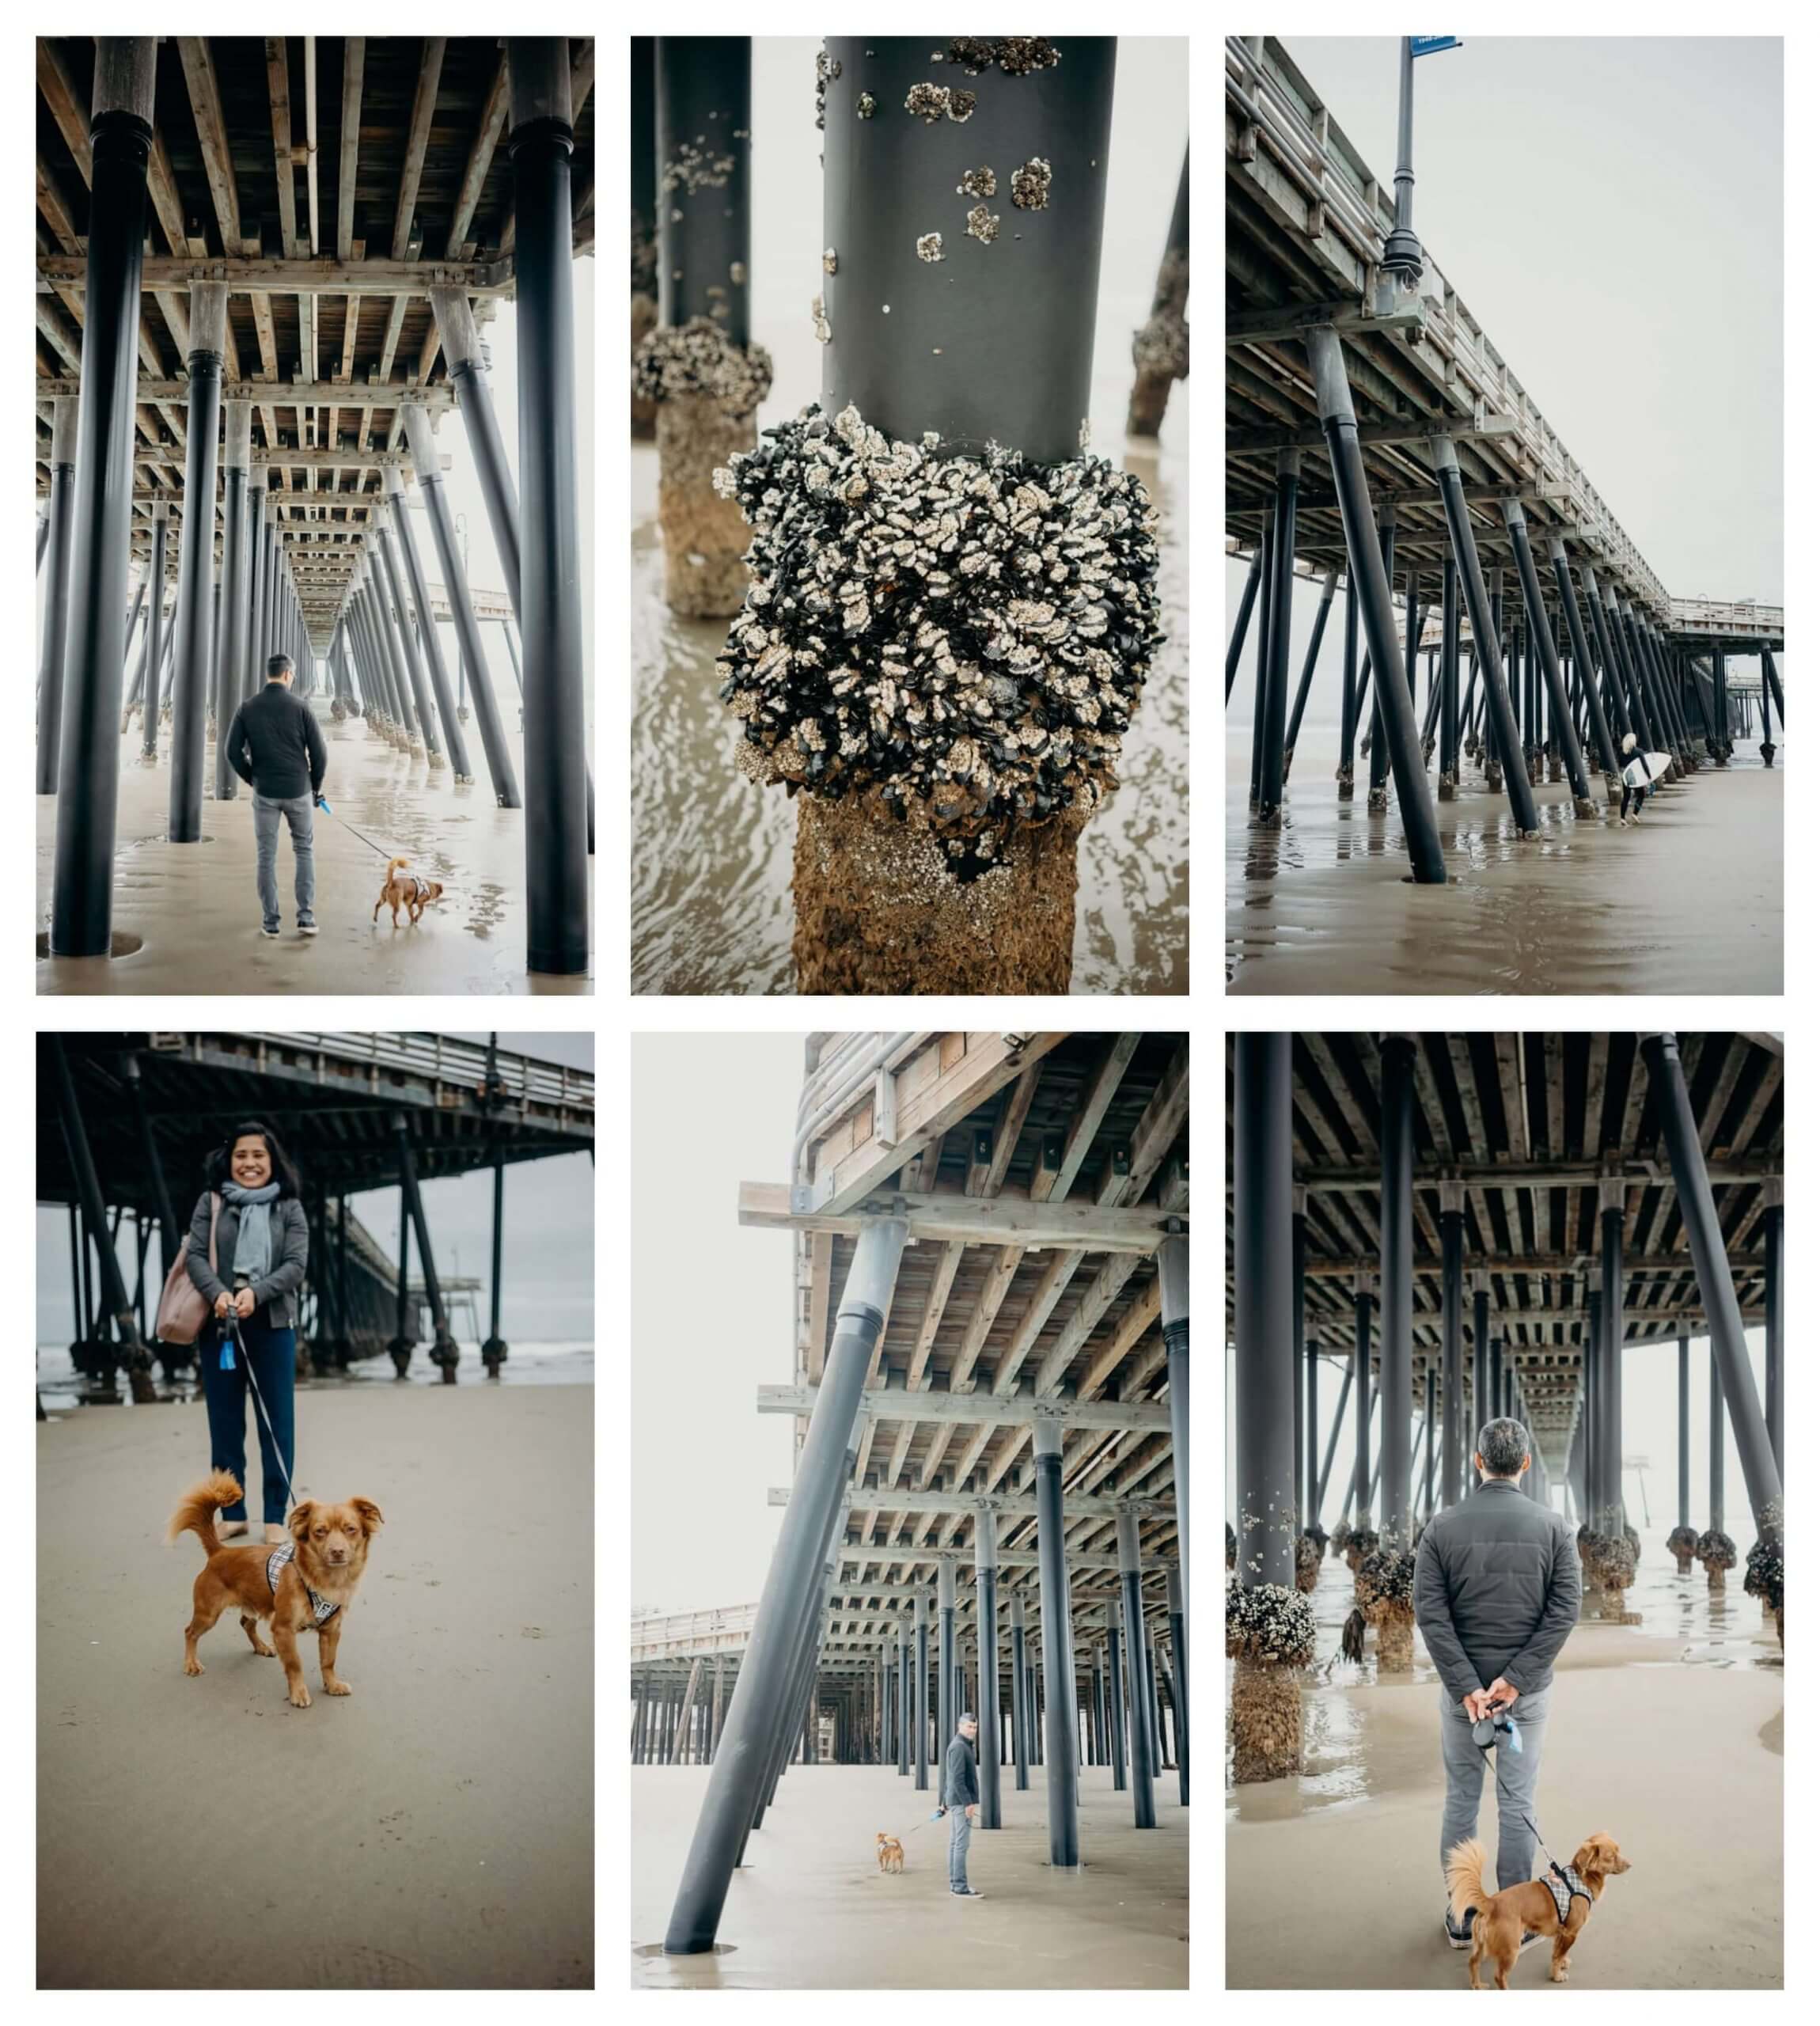 Pismo Beach is a state beach that is dog friendly, Pismo beach and Pier